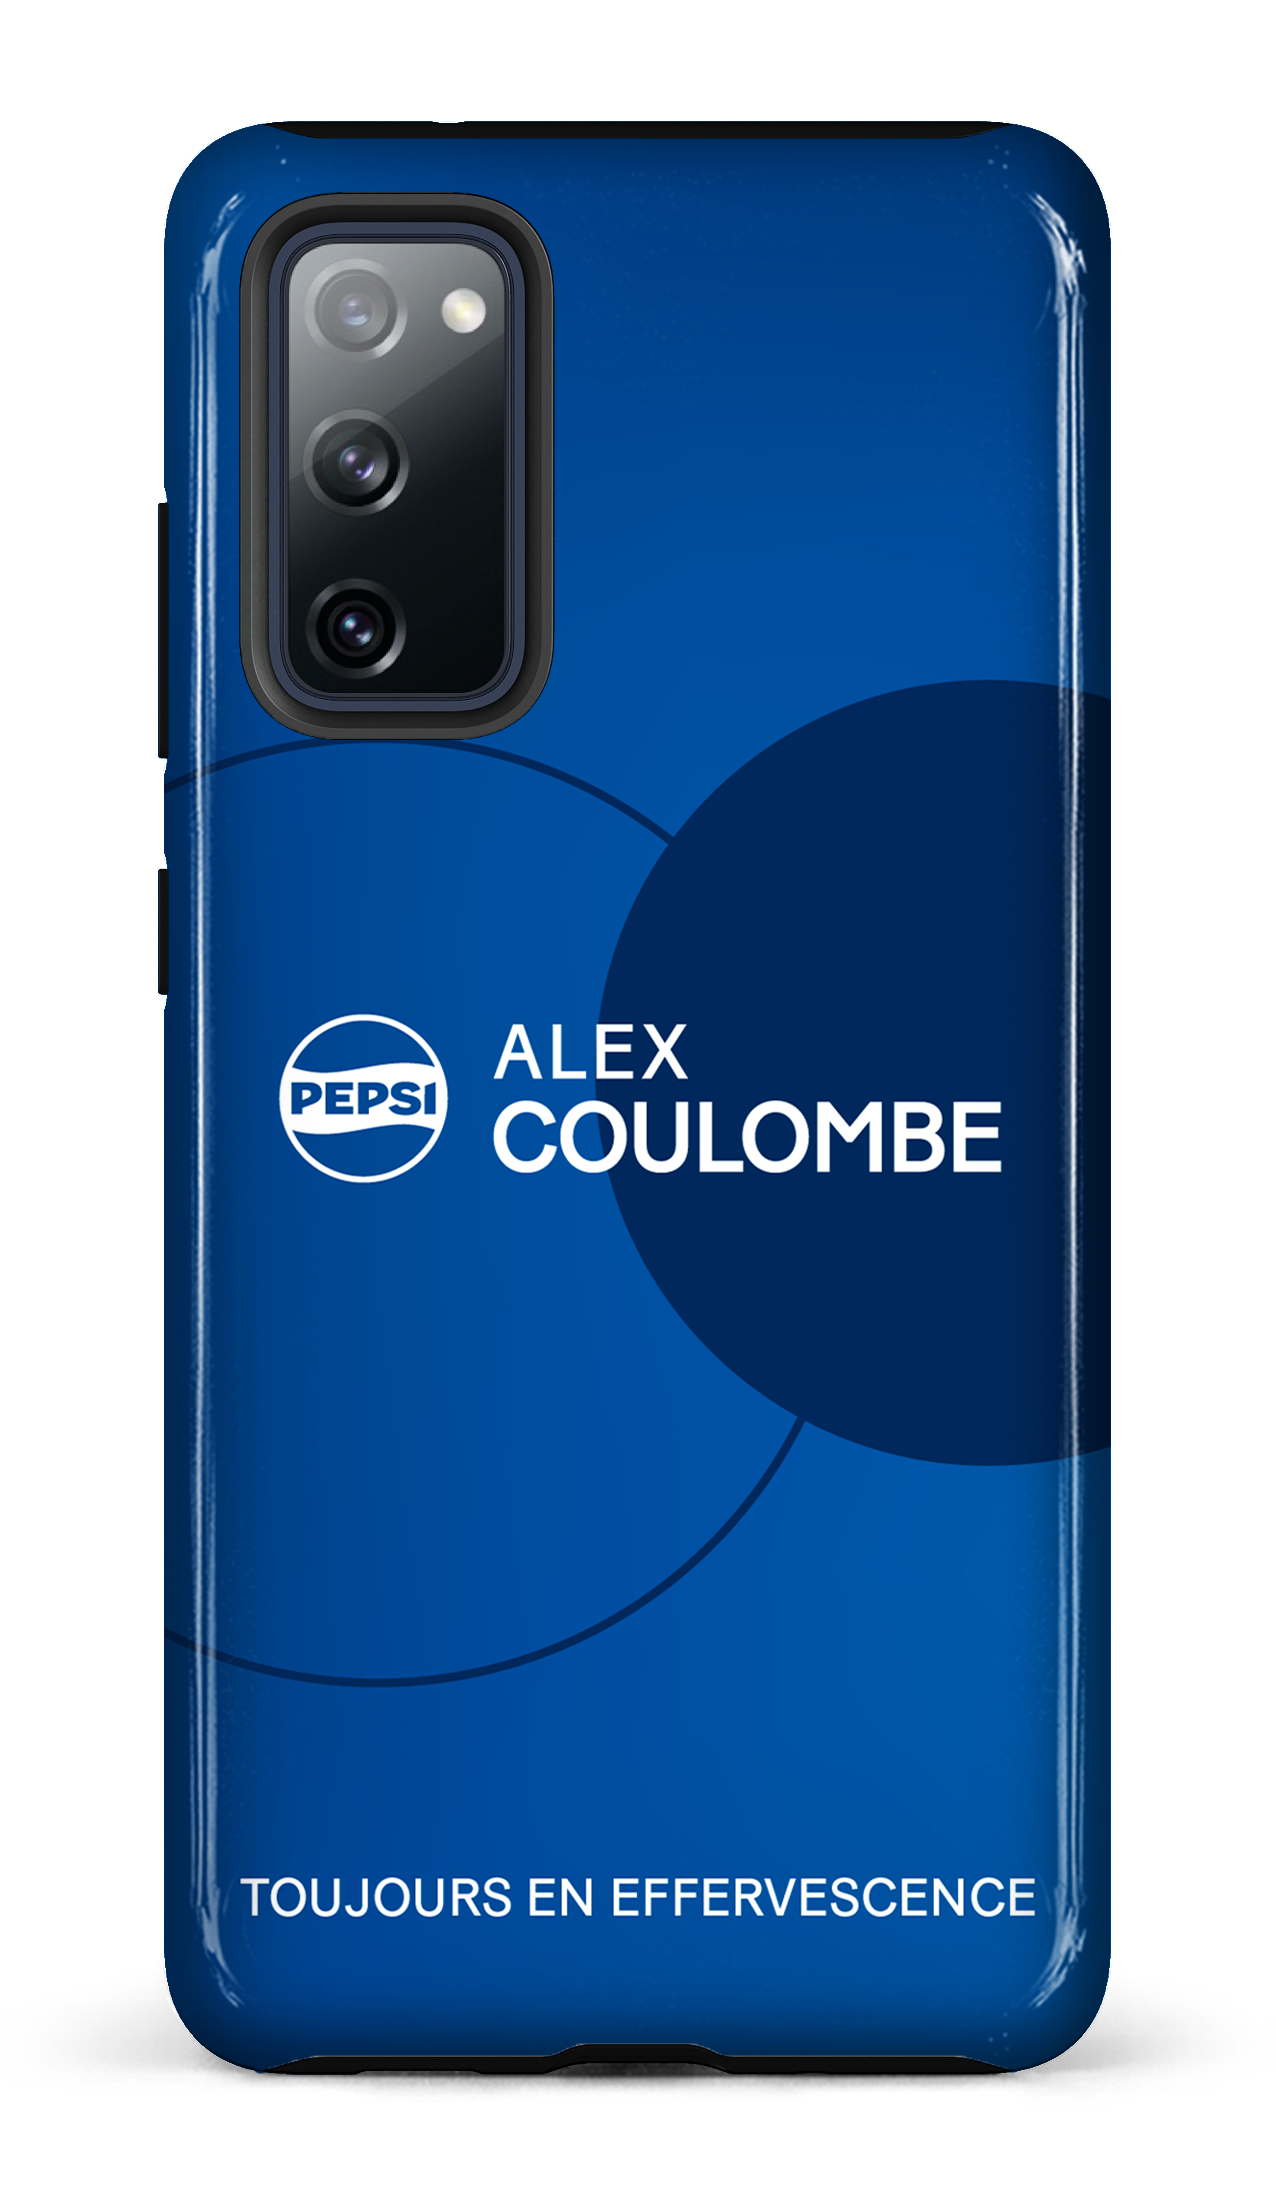 Alex Coulombe - Galaxy S20 FE